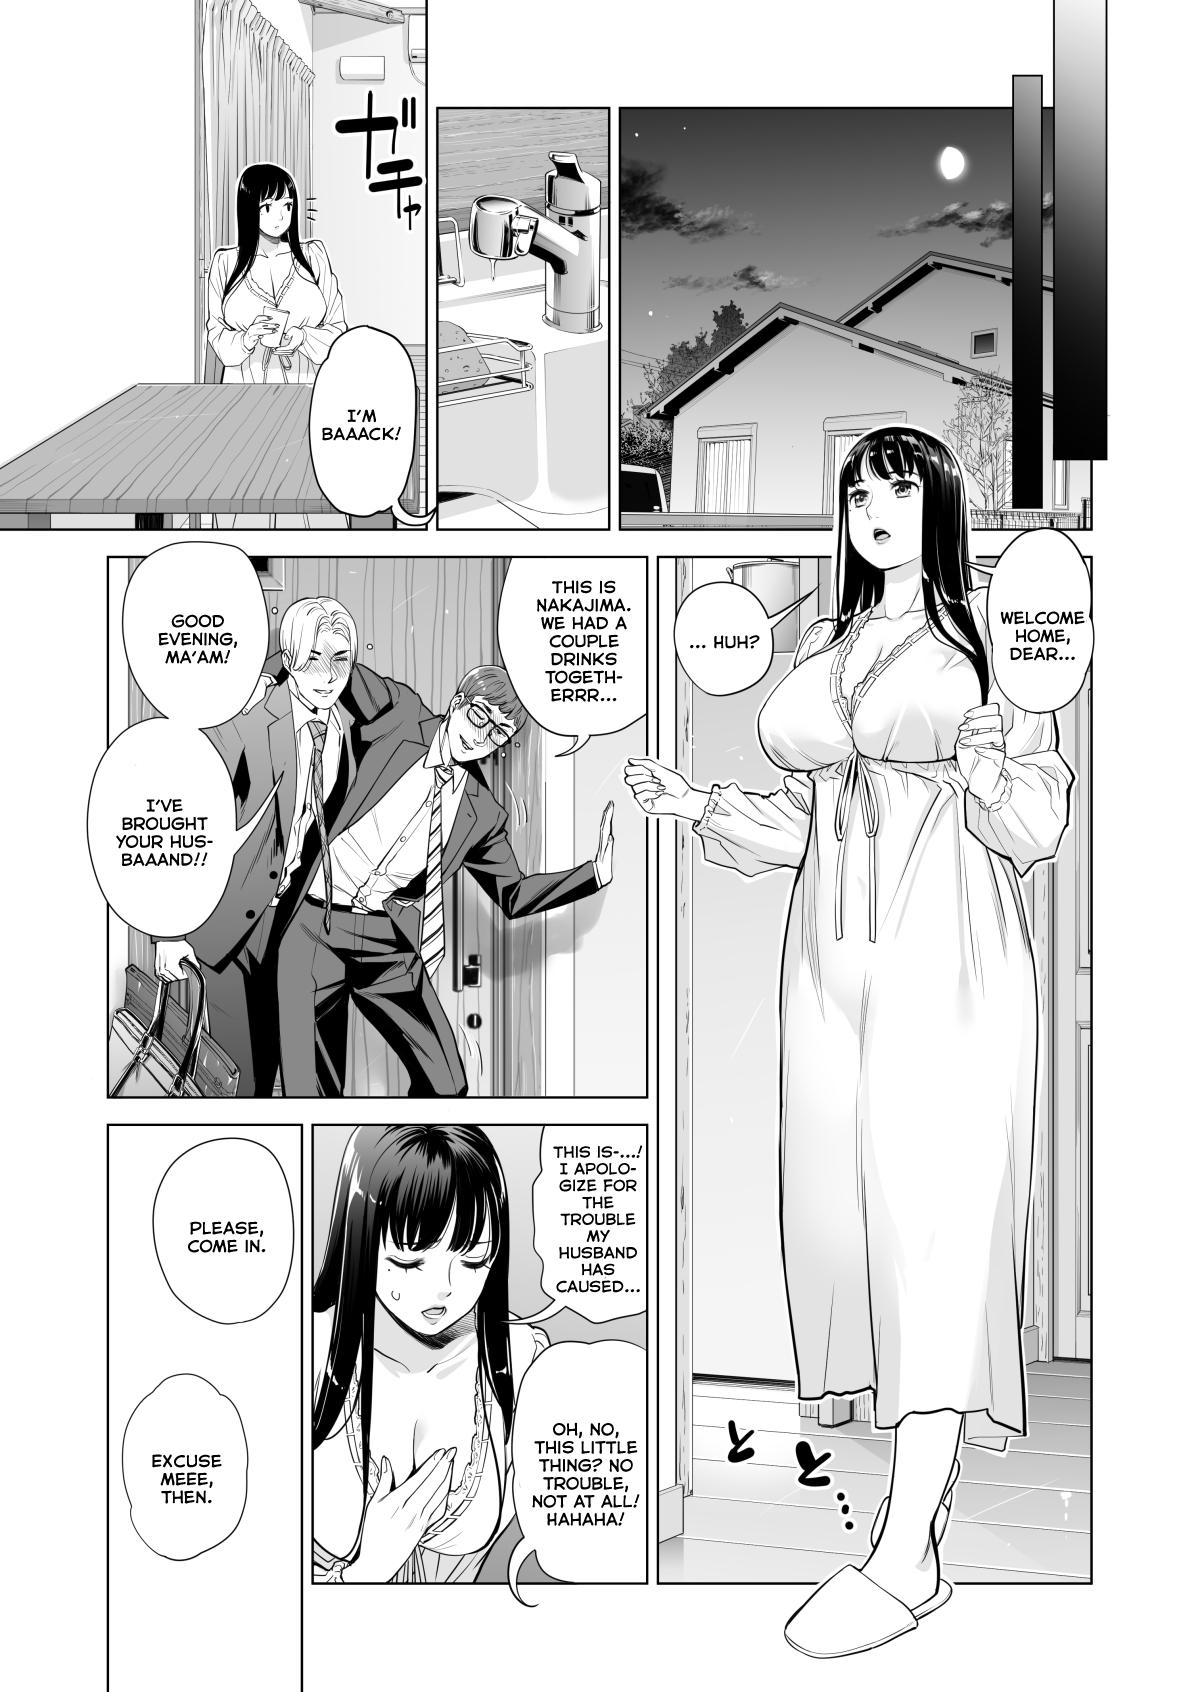 [HGT Lab (Tsusauto)] Tsukiyo no Midare Zake (Zenpen) Moonlit Intoxication ~ A Housewife Stolen by a Coworker Besides her Blackout Drunk Husband ~ Chapter 1 [English] 13